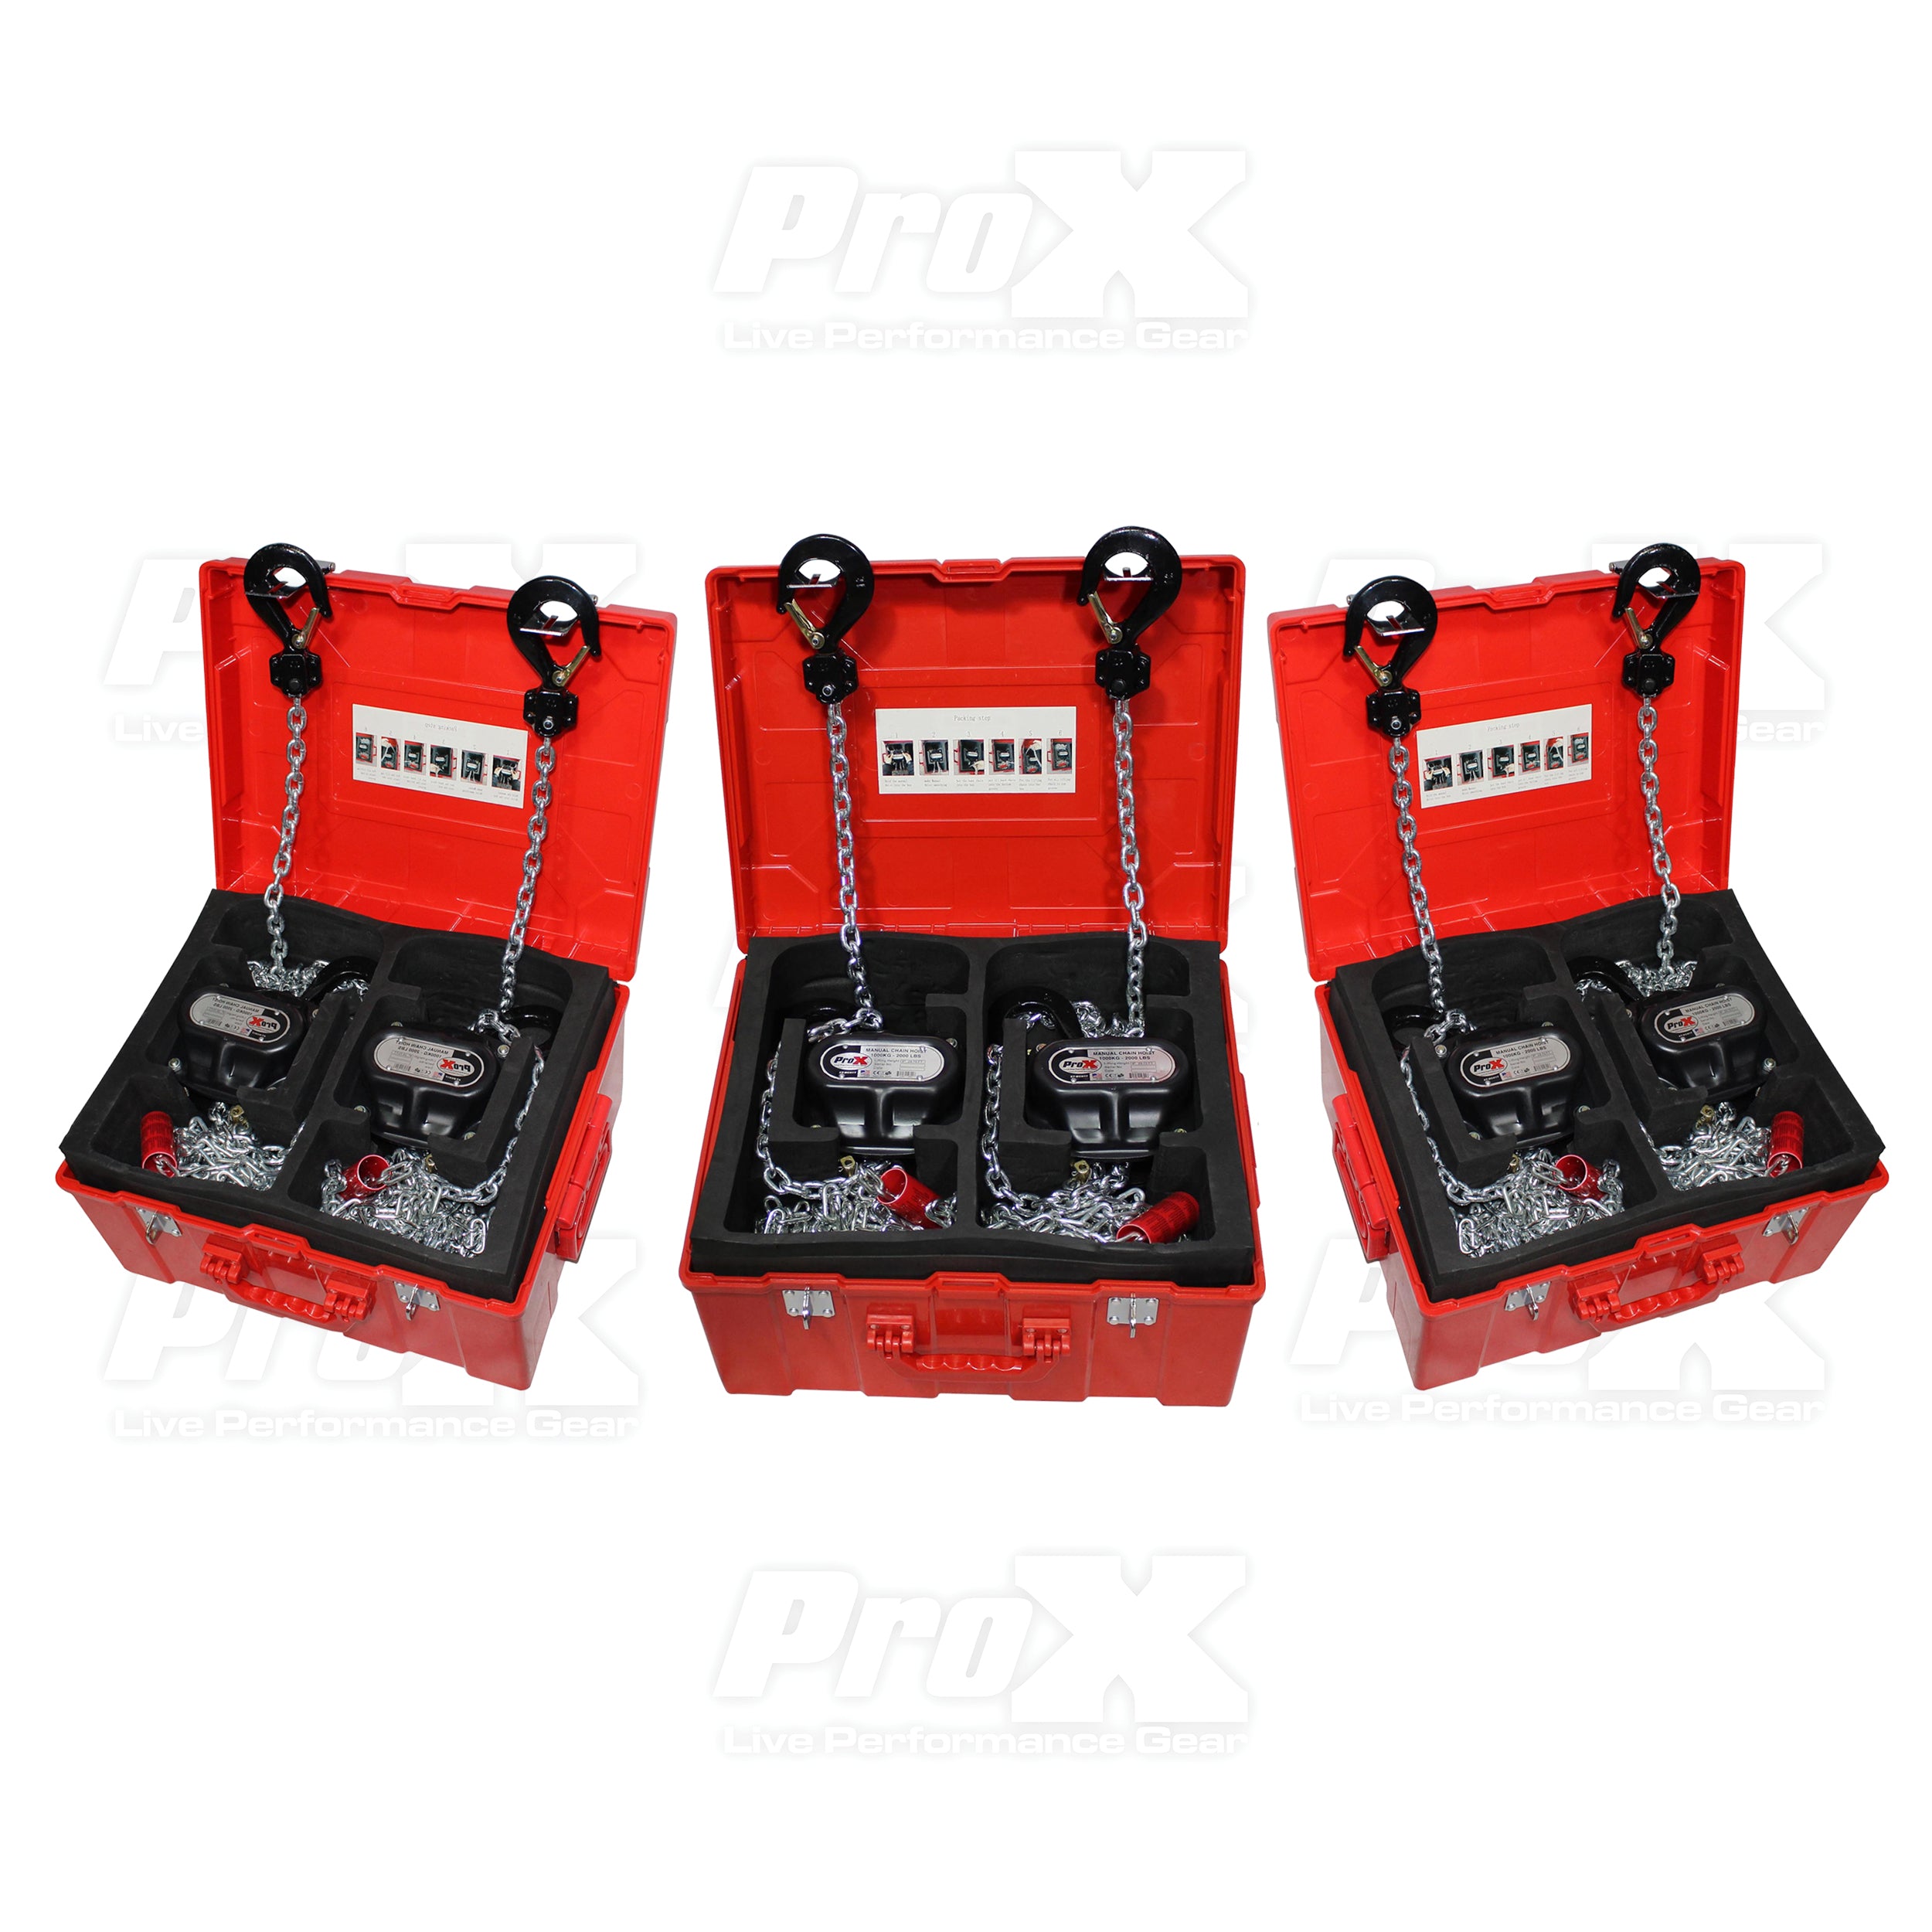 Pro X 12D PR3 Stage Roofing System with 7 Ft Speaker Wings and 6 Chain Hoists | 30 Ft W x 20 Ft L x 23 Ft H XTP-GS302023-PR3-12D